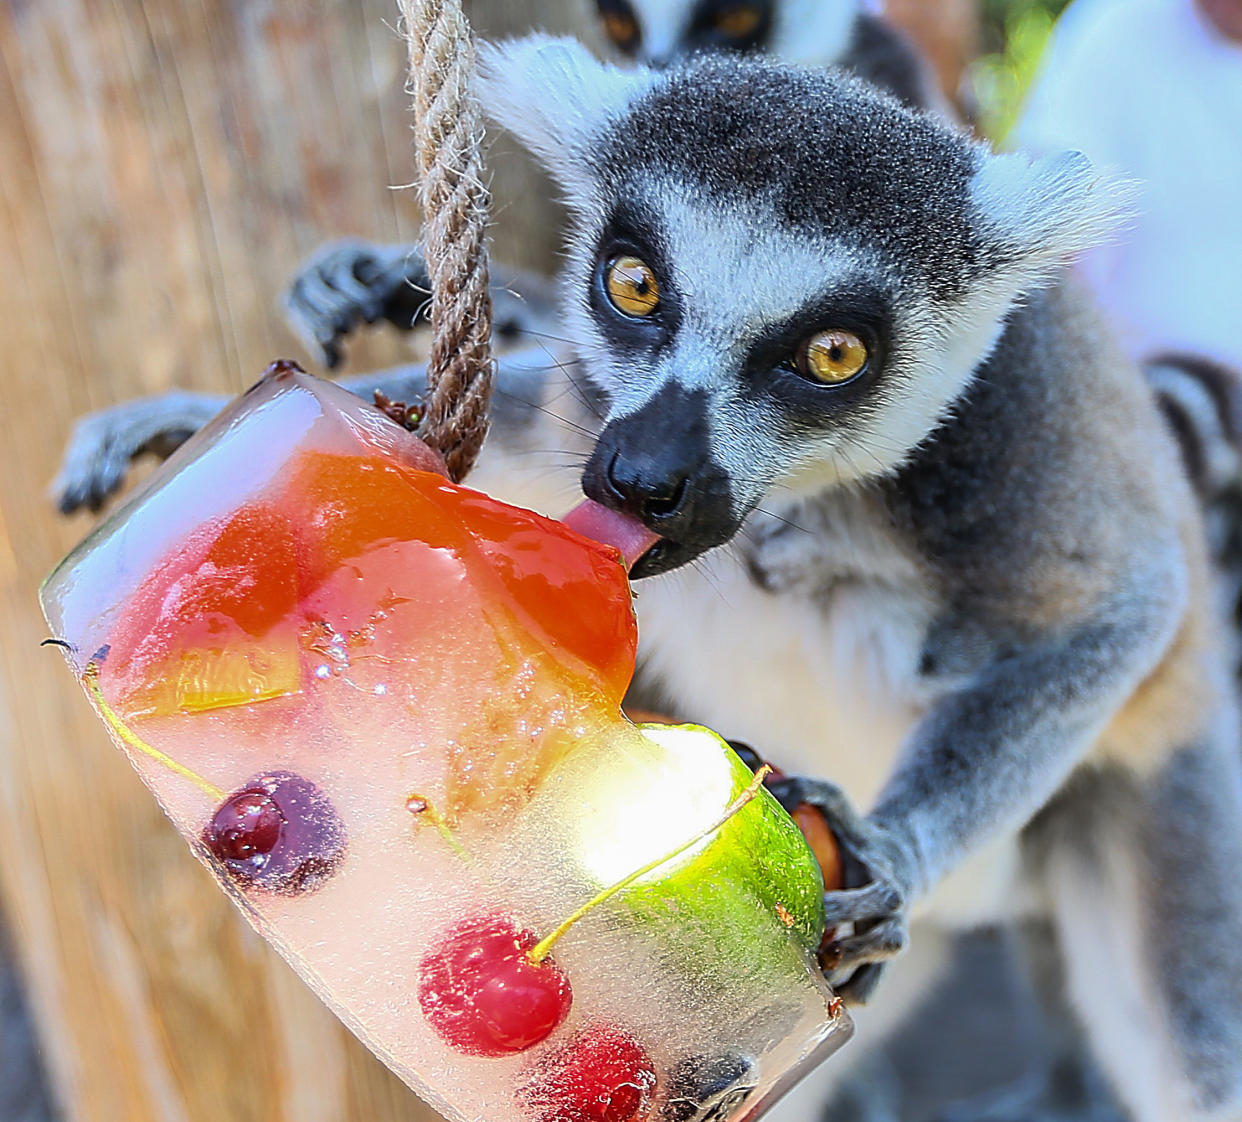 https://www.gettyimages.co.uk/detail/news-photo/lemur-tries-to-eat-specially-prepared-iced-fruit-to-cool-news-photo/542122694